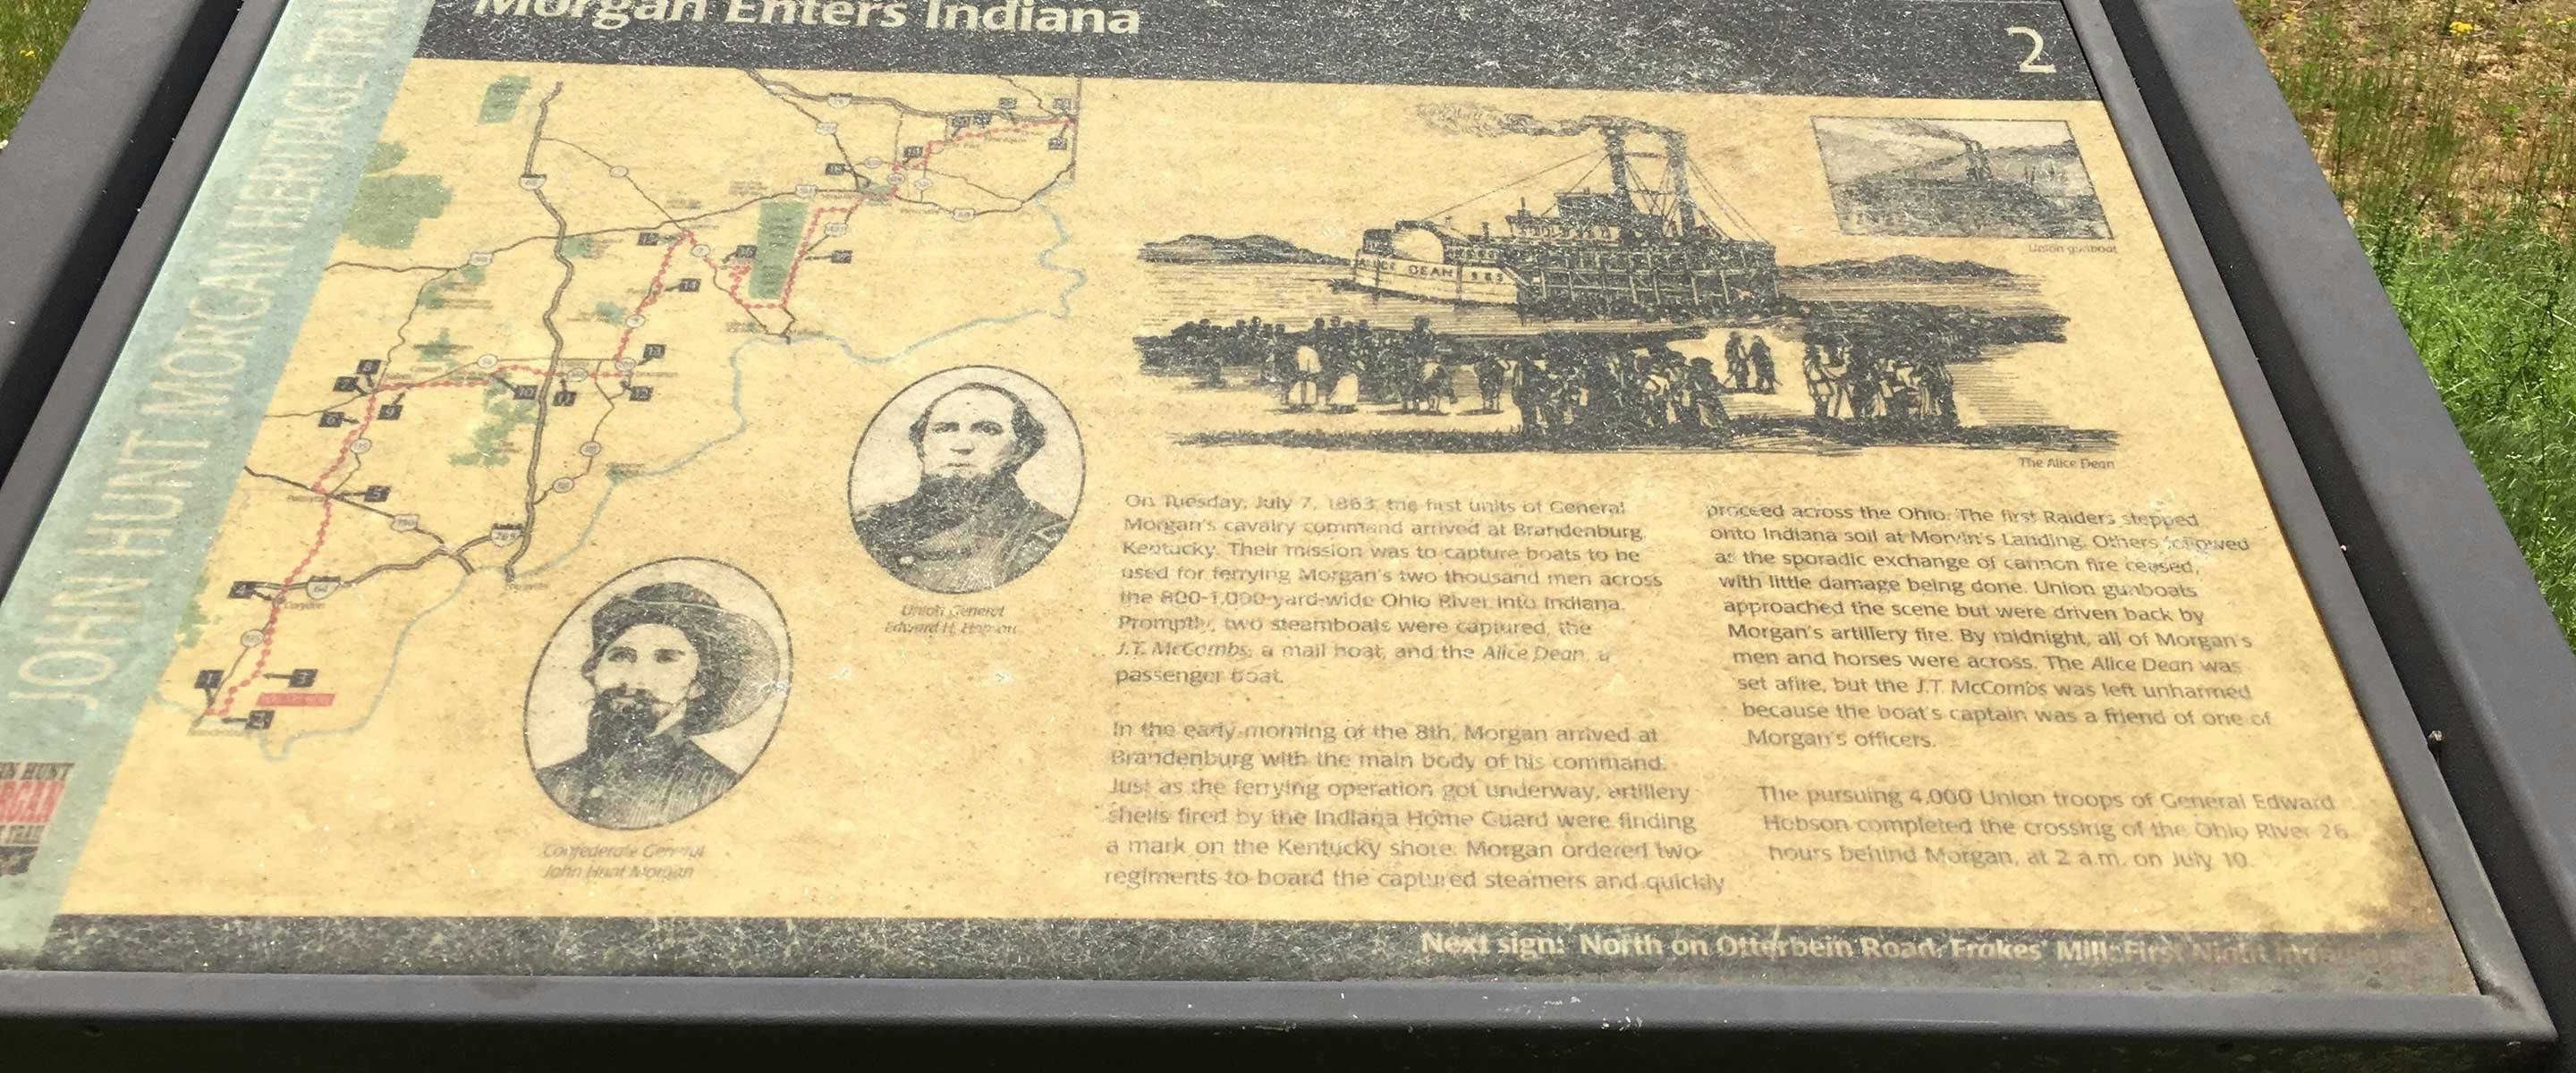 upclose view of the map in the park detailing its history